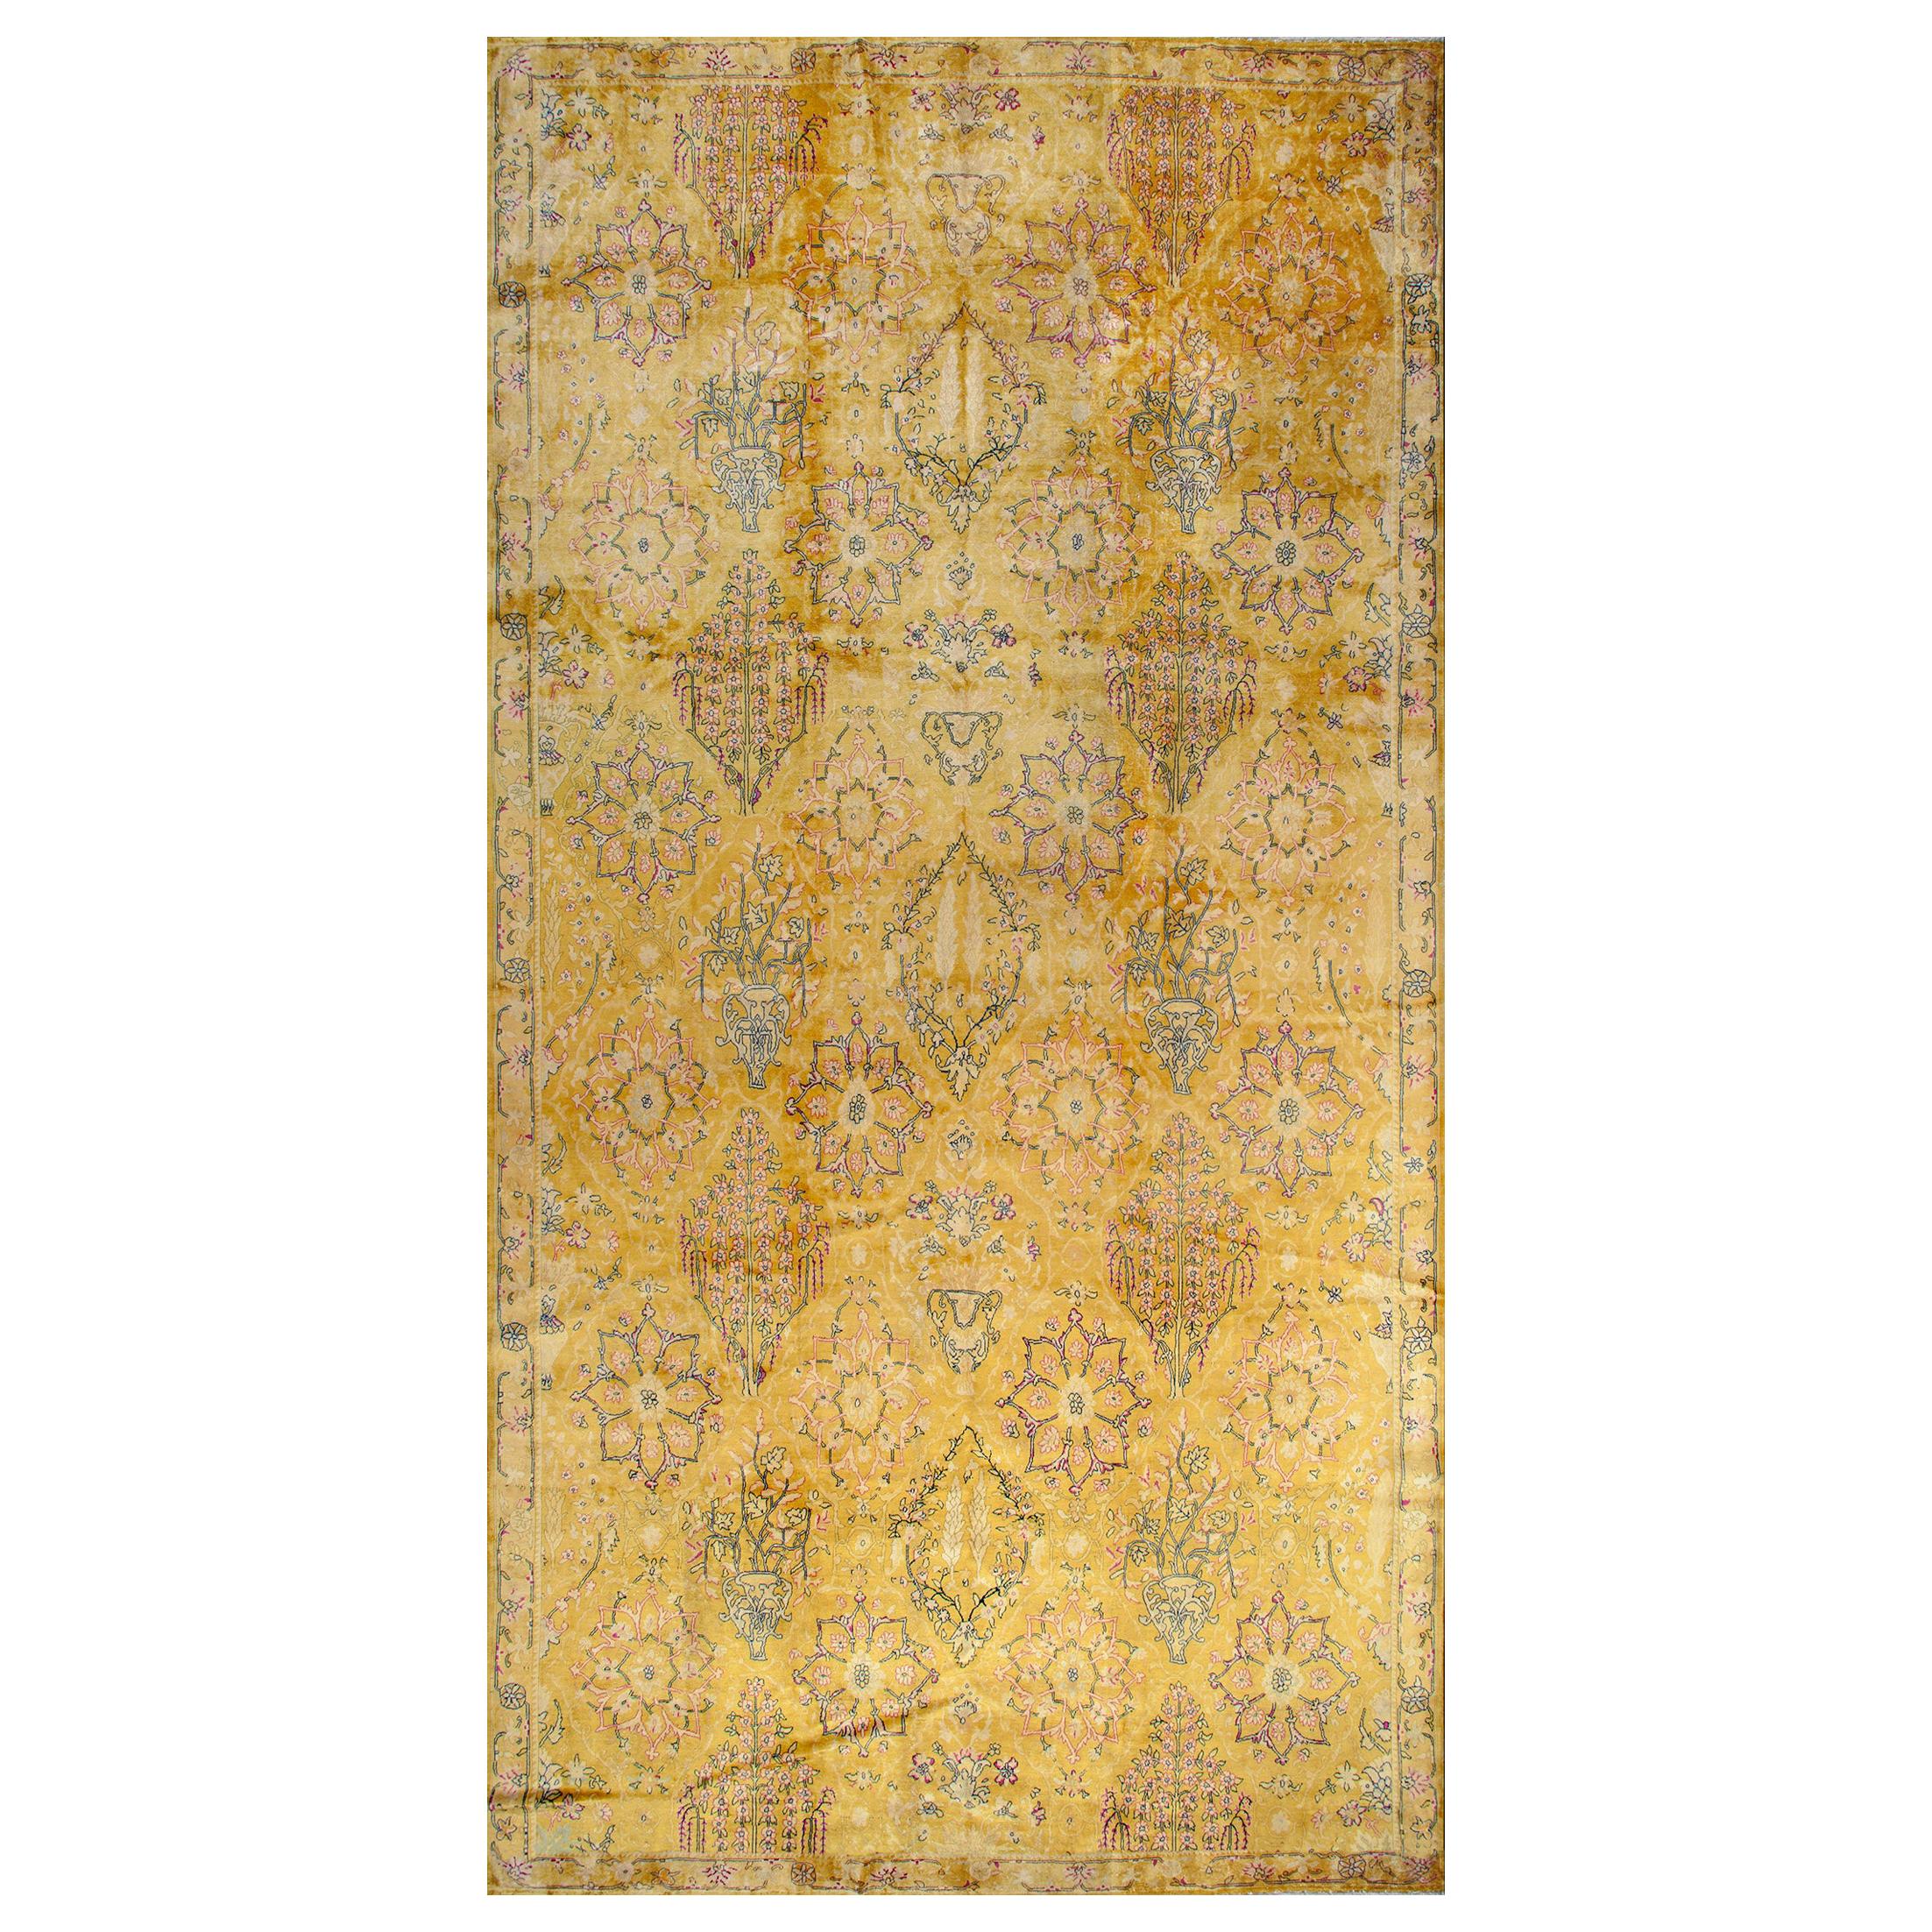 Early 20th Century Indian Lahore Carpet ( 11' x 22'4" - 335 x 680 cm ) For Sale